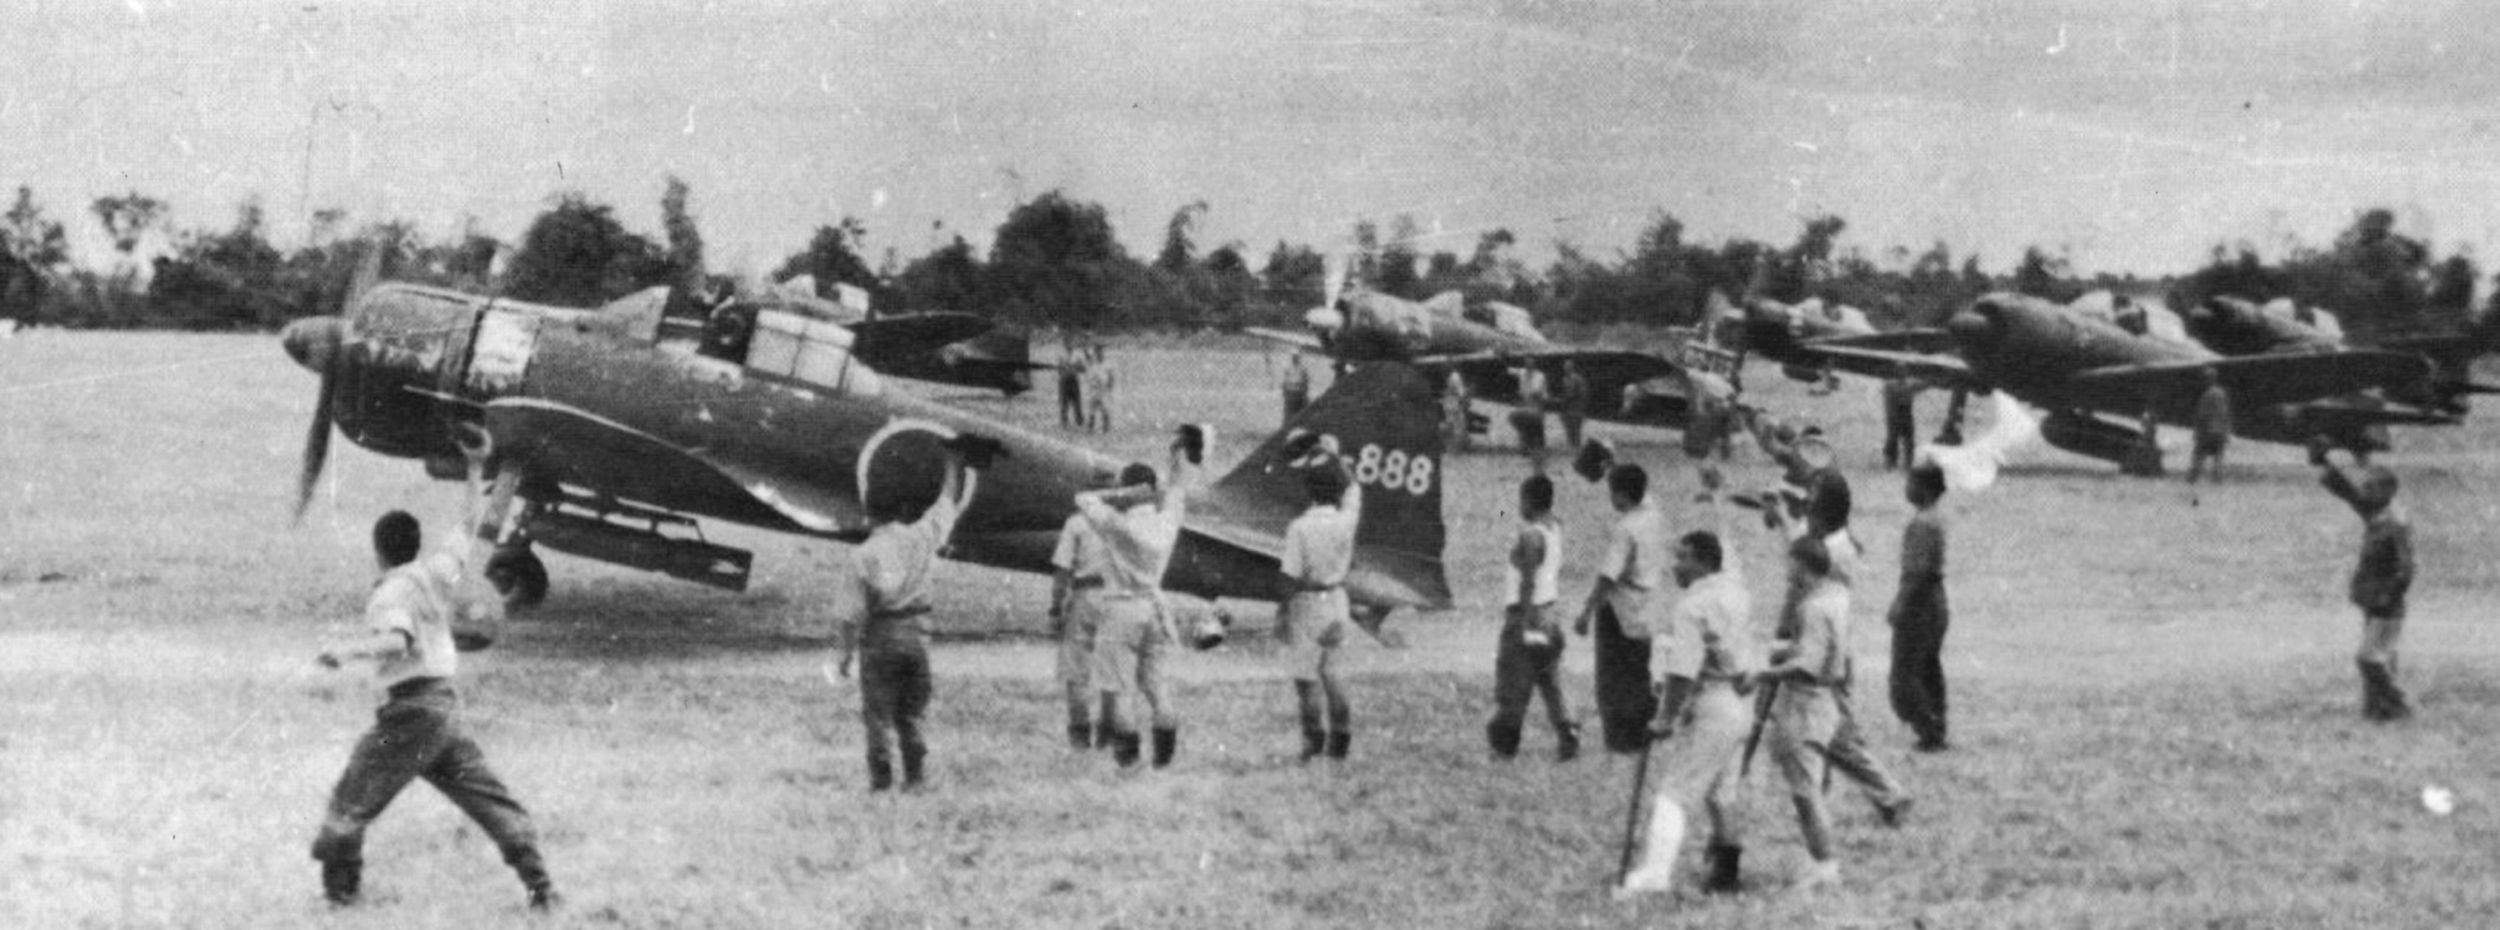 In this photo, a Japanese kamikaze pilot, his canopy open, taxis on Clark Field toward a rendezvous with death during an early suicide raid in October 1944. Ground crewmen shout encouragement to the doomed pilot. In the beginning, kamikaze raids were conducted by volunteers. Later, pilots were ordered to carry out the suicide missions.